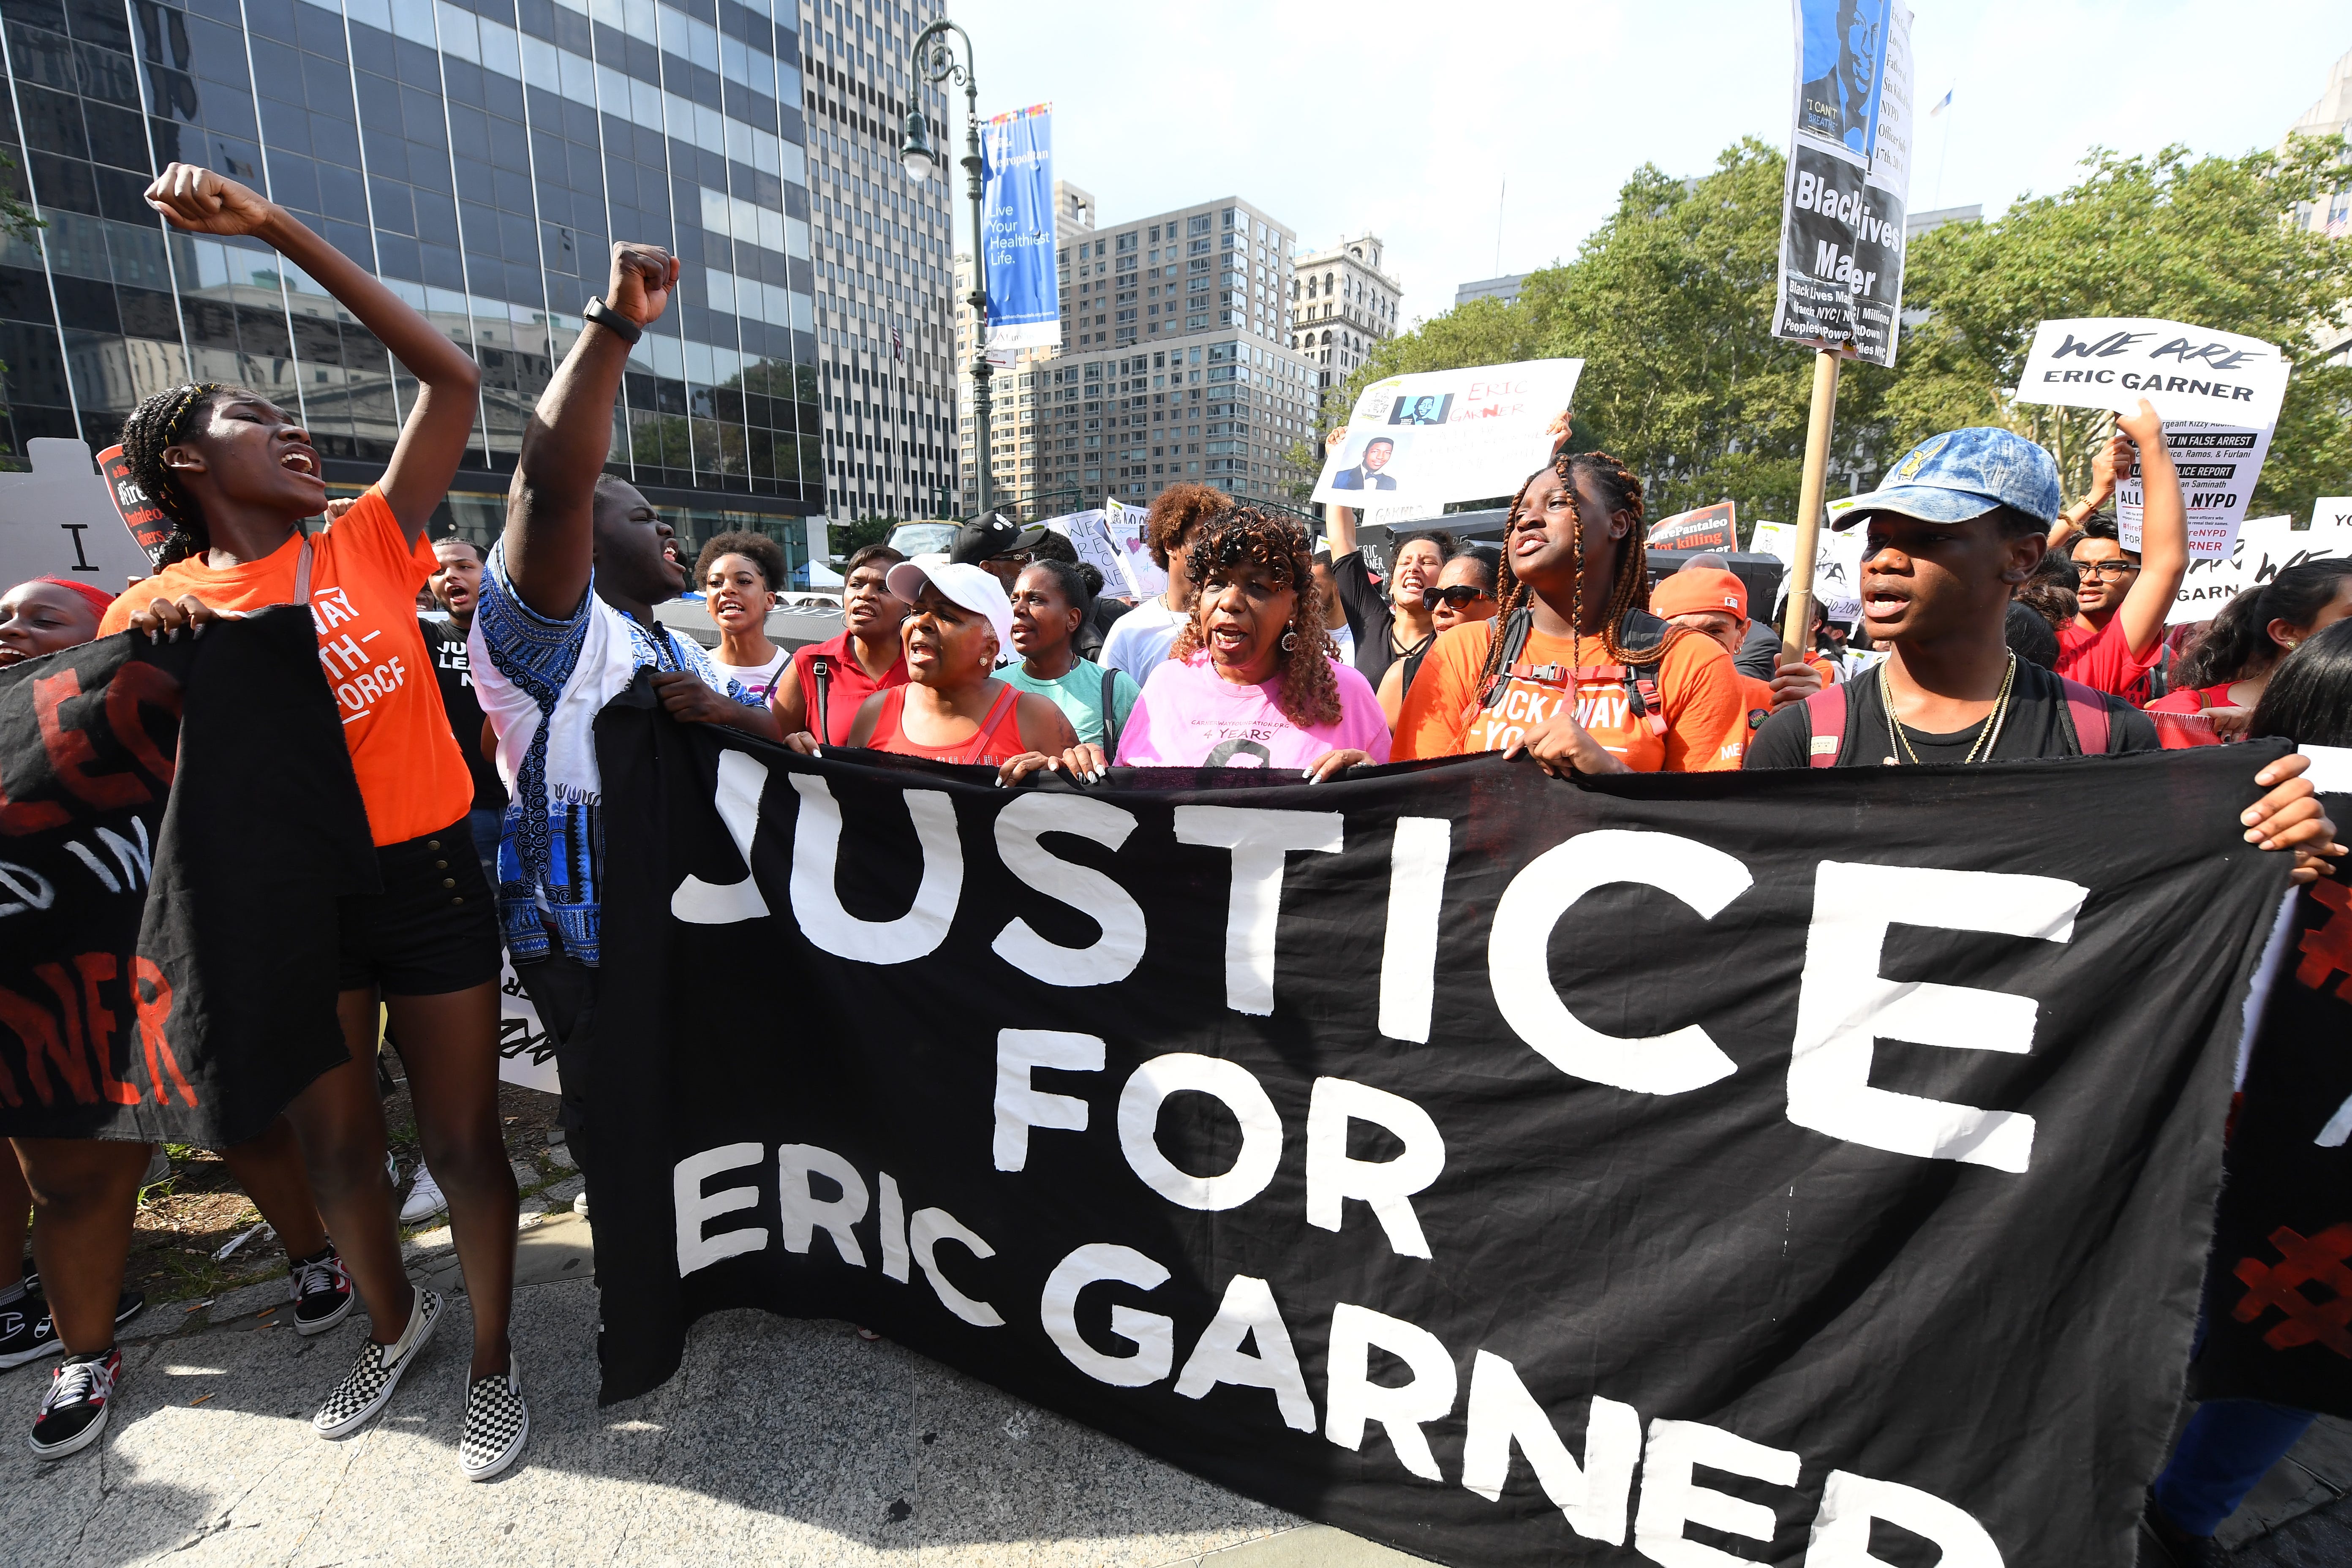 Eric protest: Youths call NYPD officers to be fired